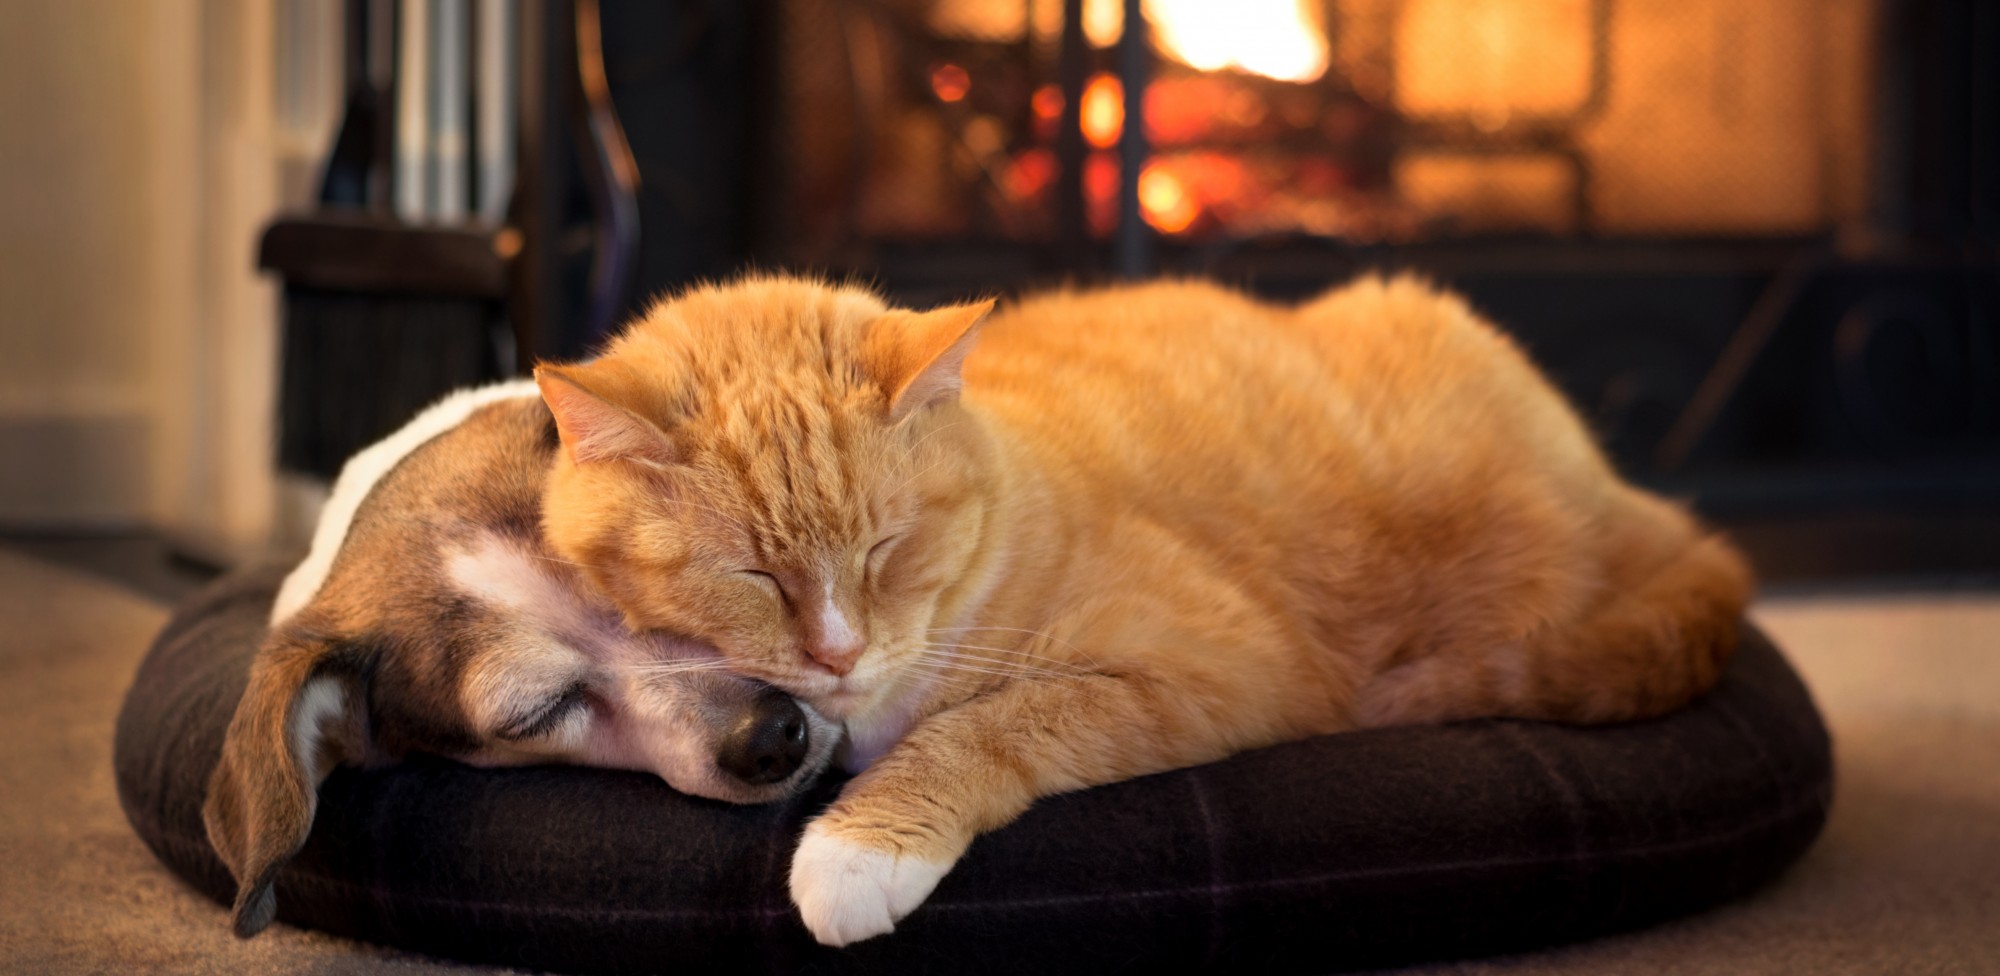 Dog and cat in front of fireplace